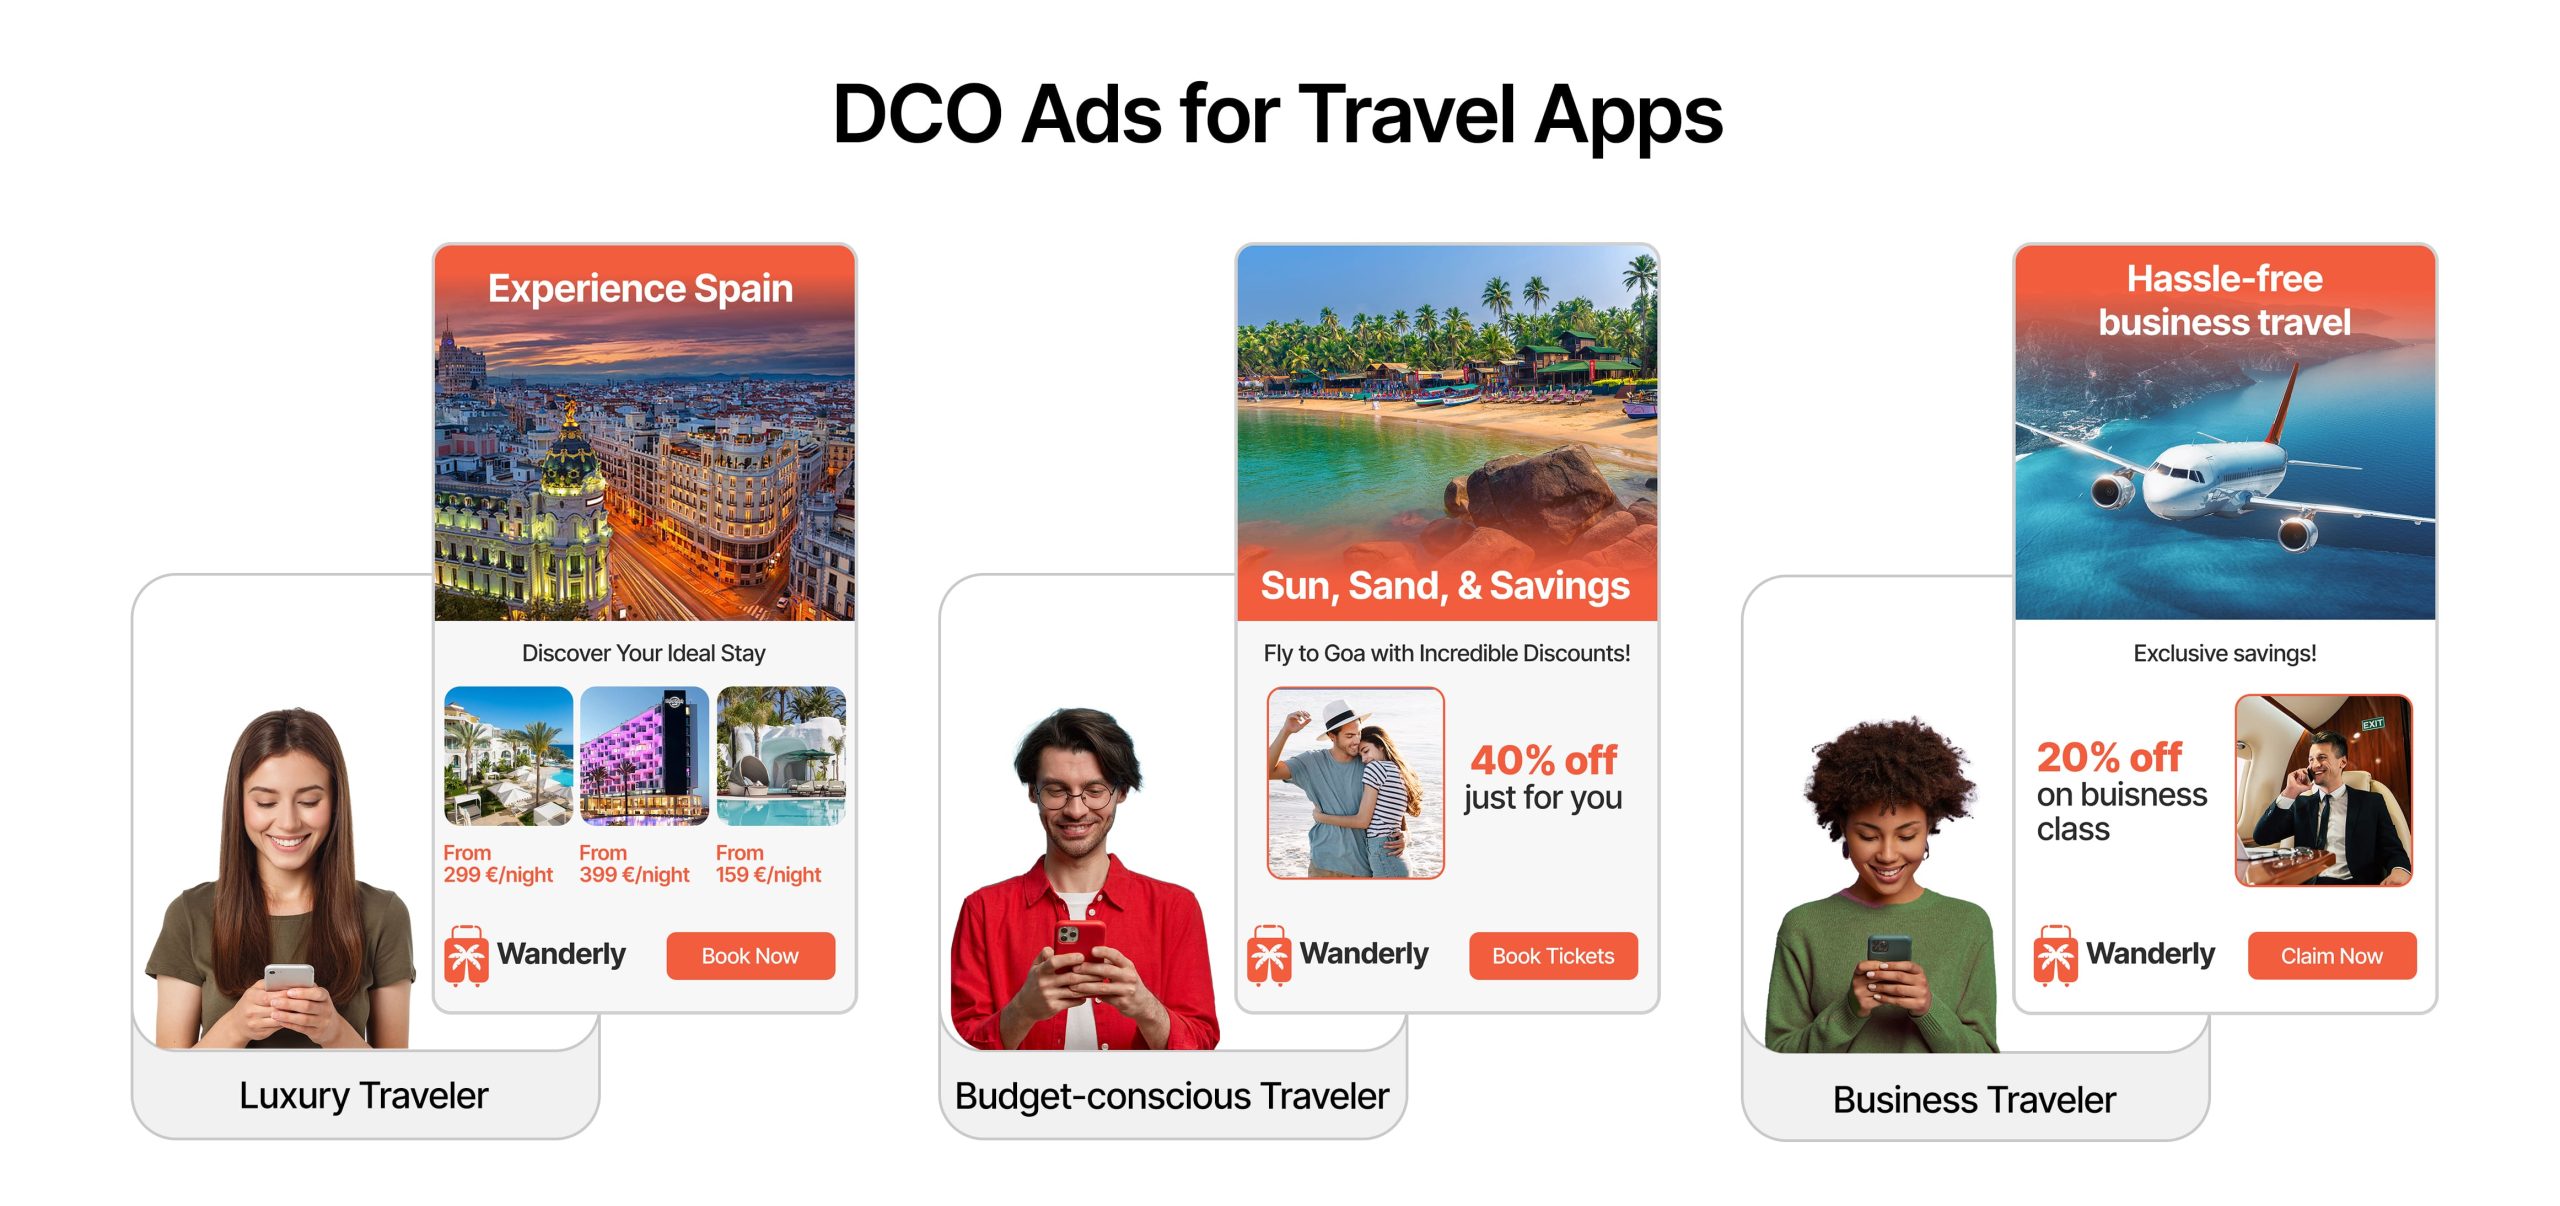 Illustration of DCO ads for travel apps